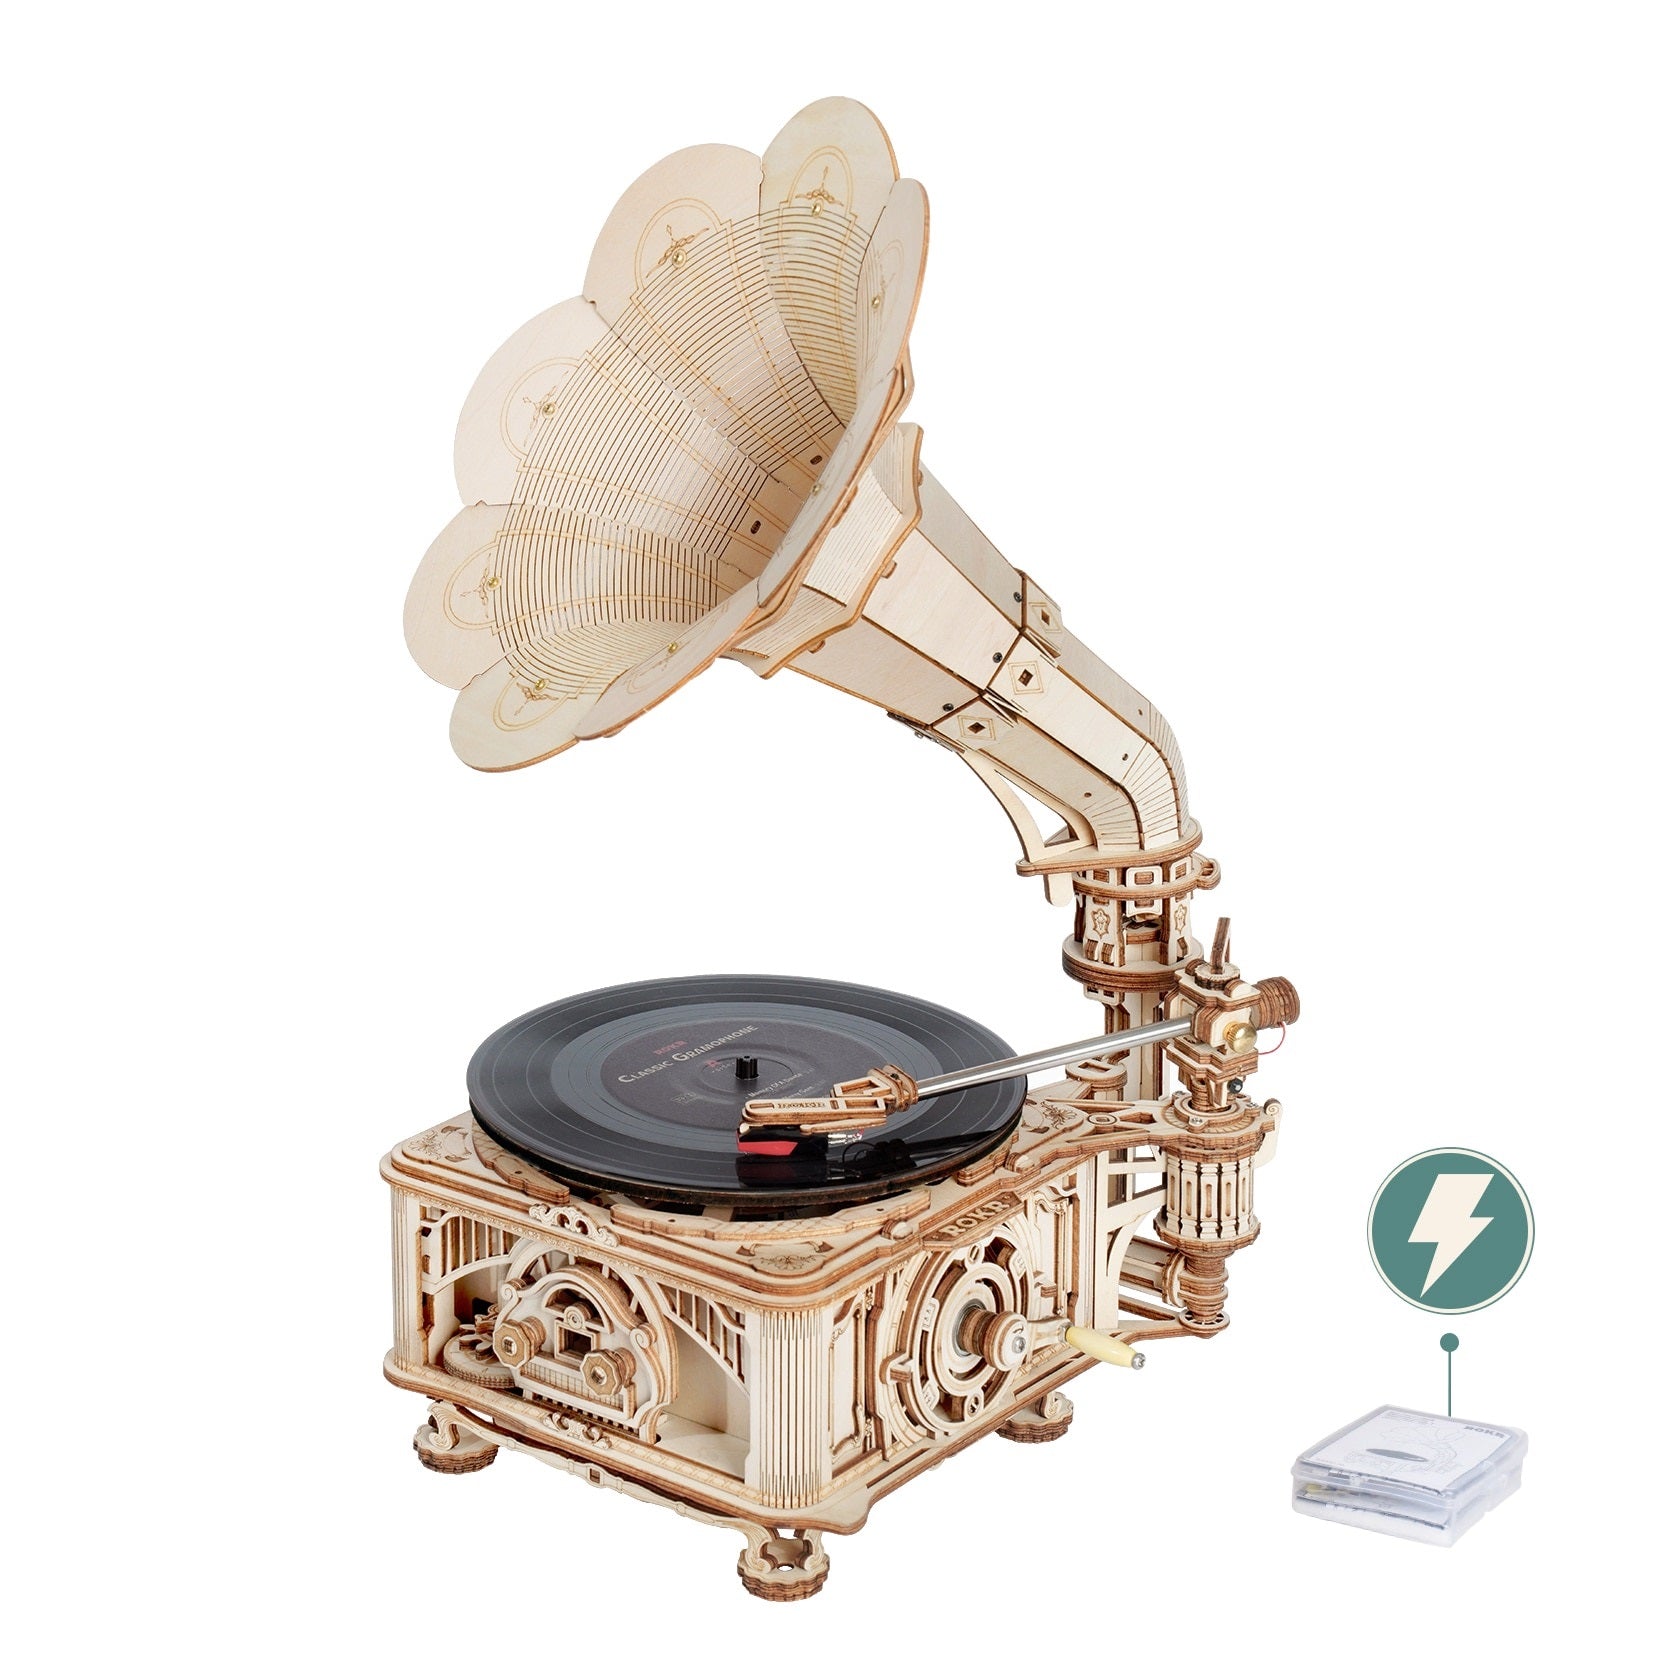 Hand Crank Classic Gramophone with Music 424pcs Wooden Model Building Kits Gift for Children Adult